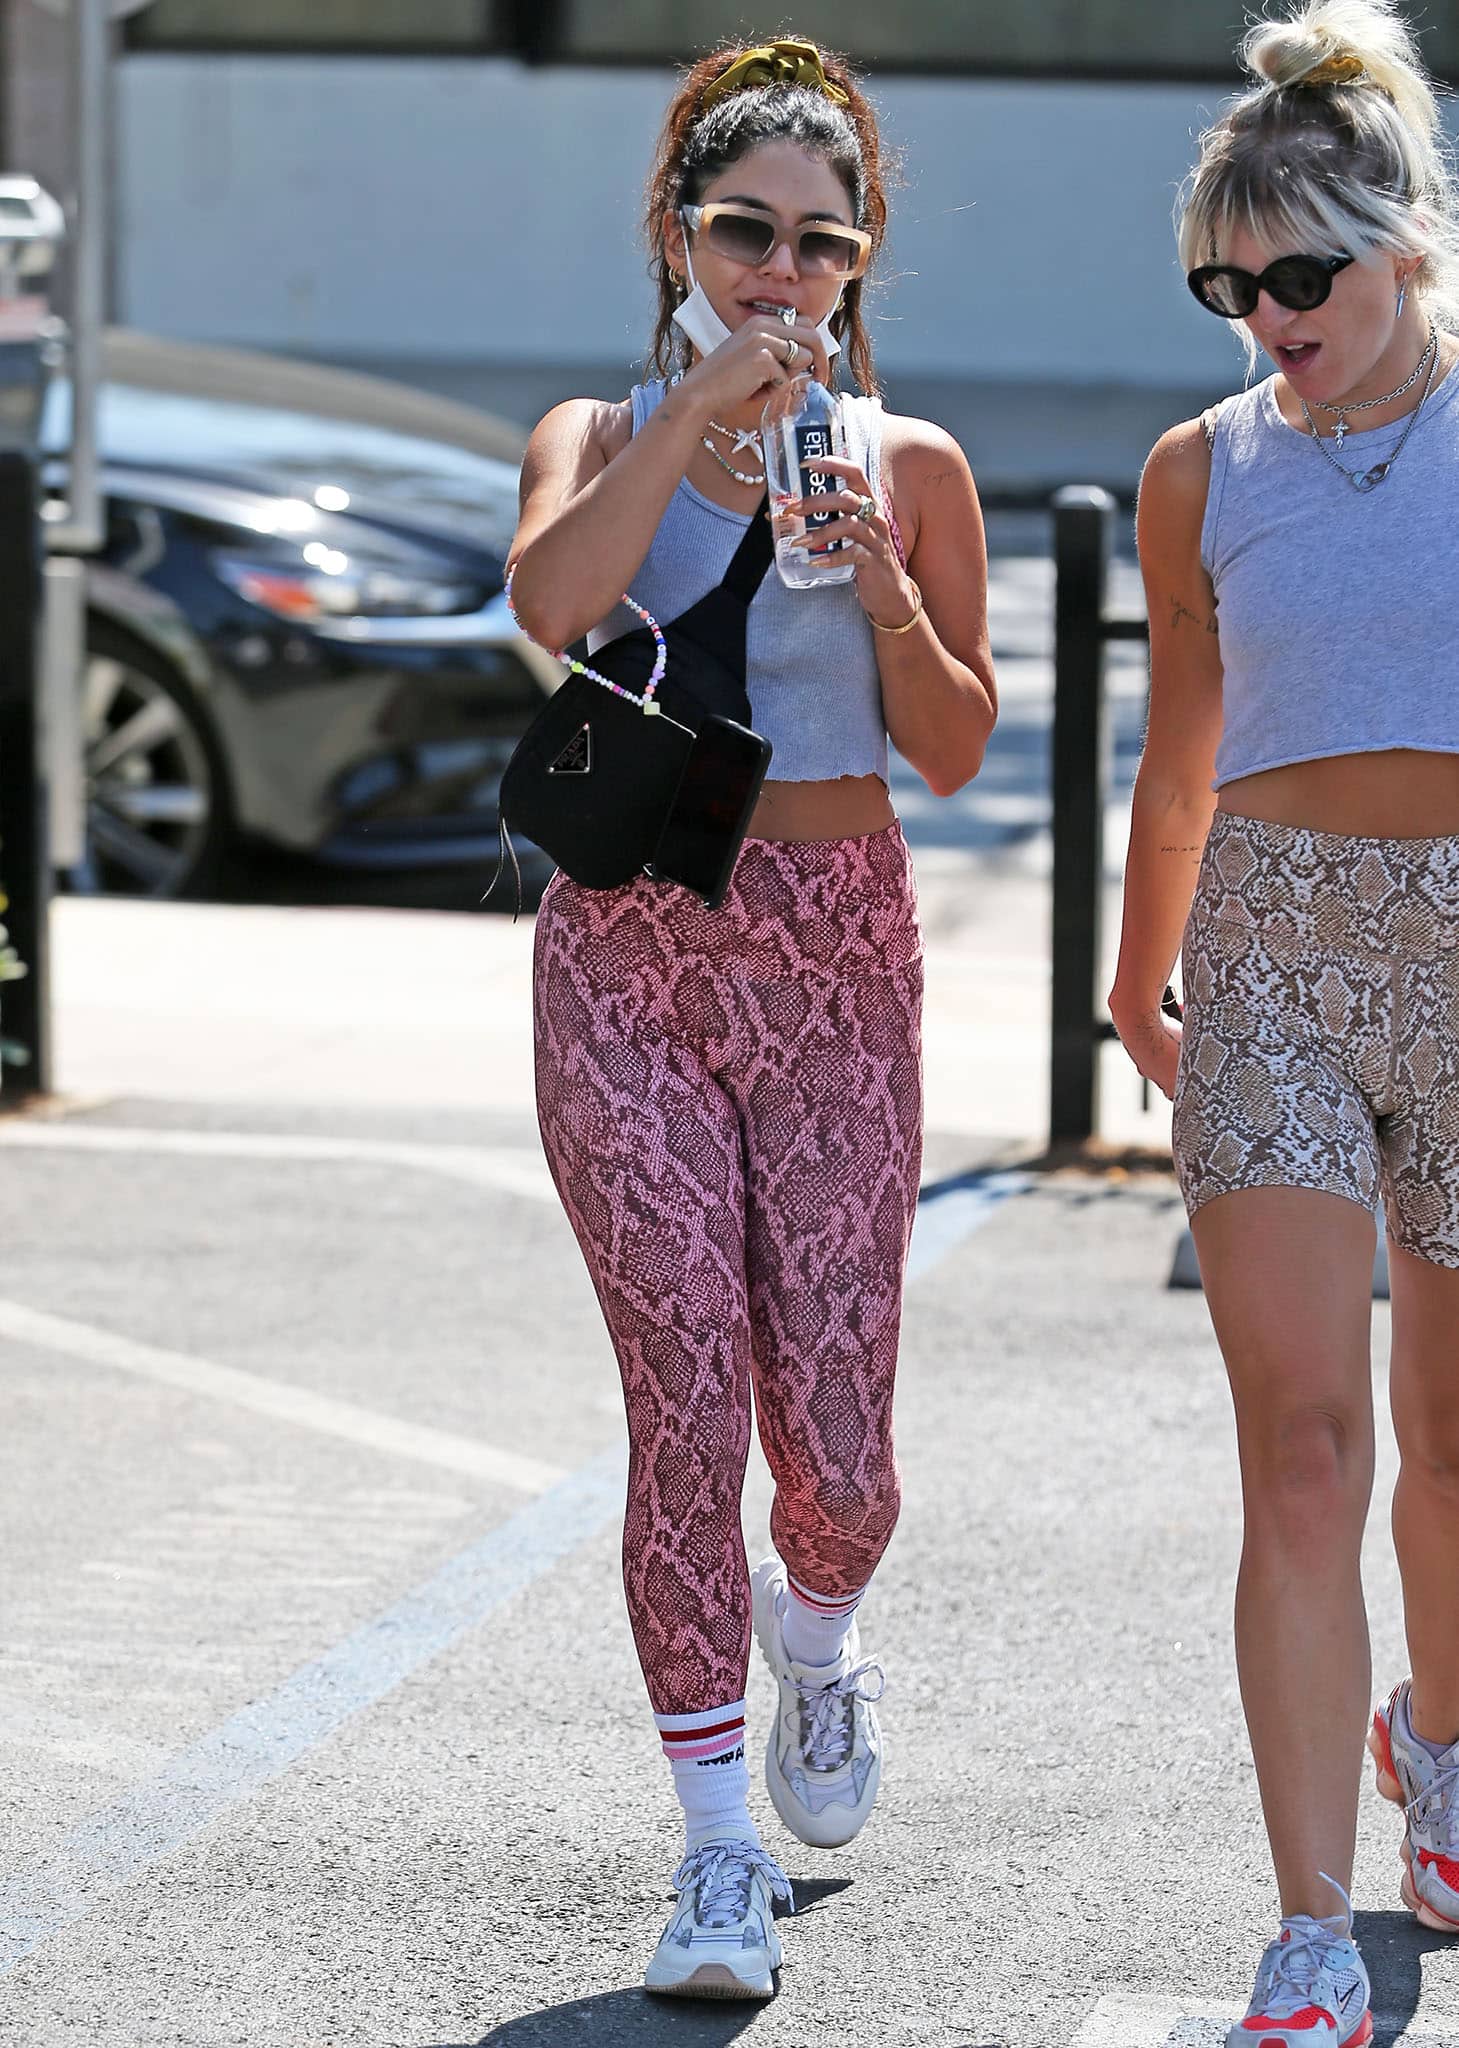 Vanessa Hudgens showed off her abs in a gray tank top with Skatie pink snake-print leggings